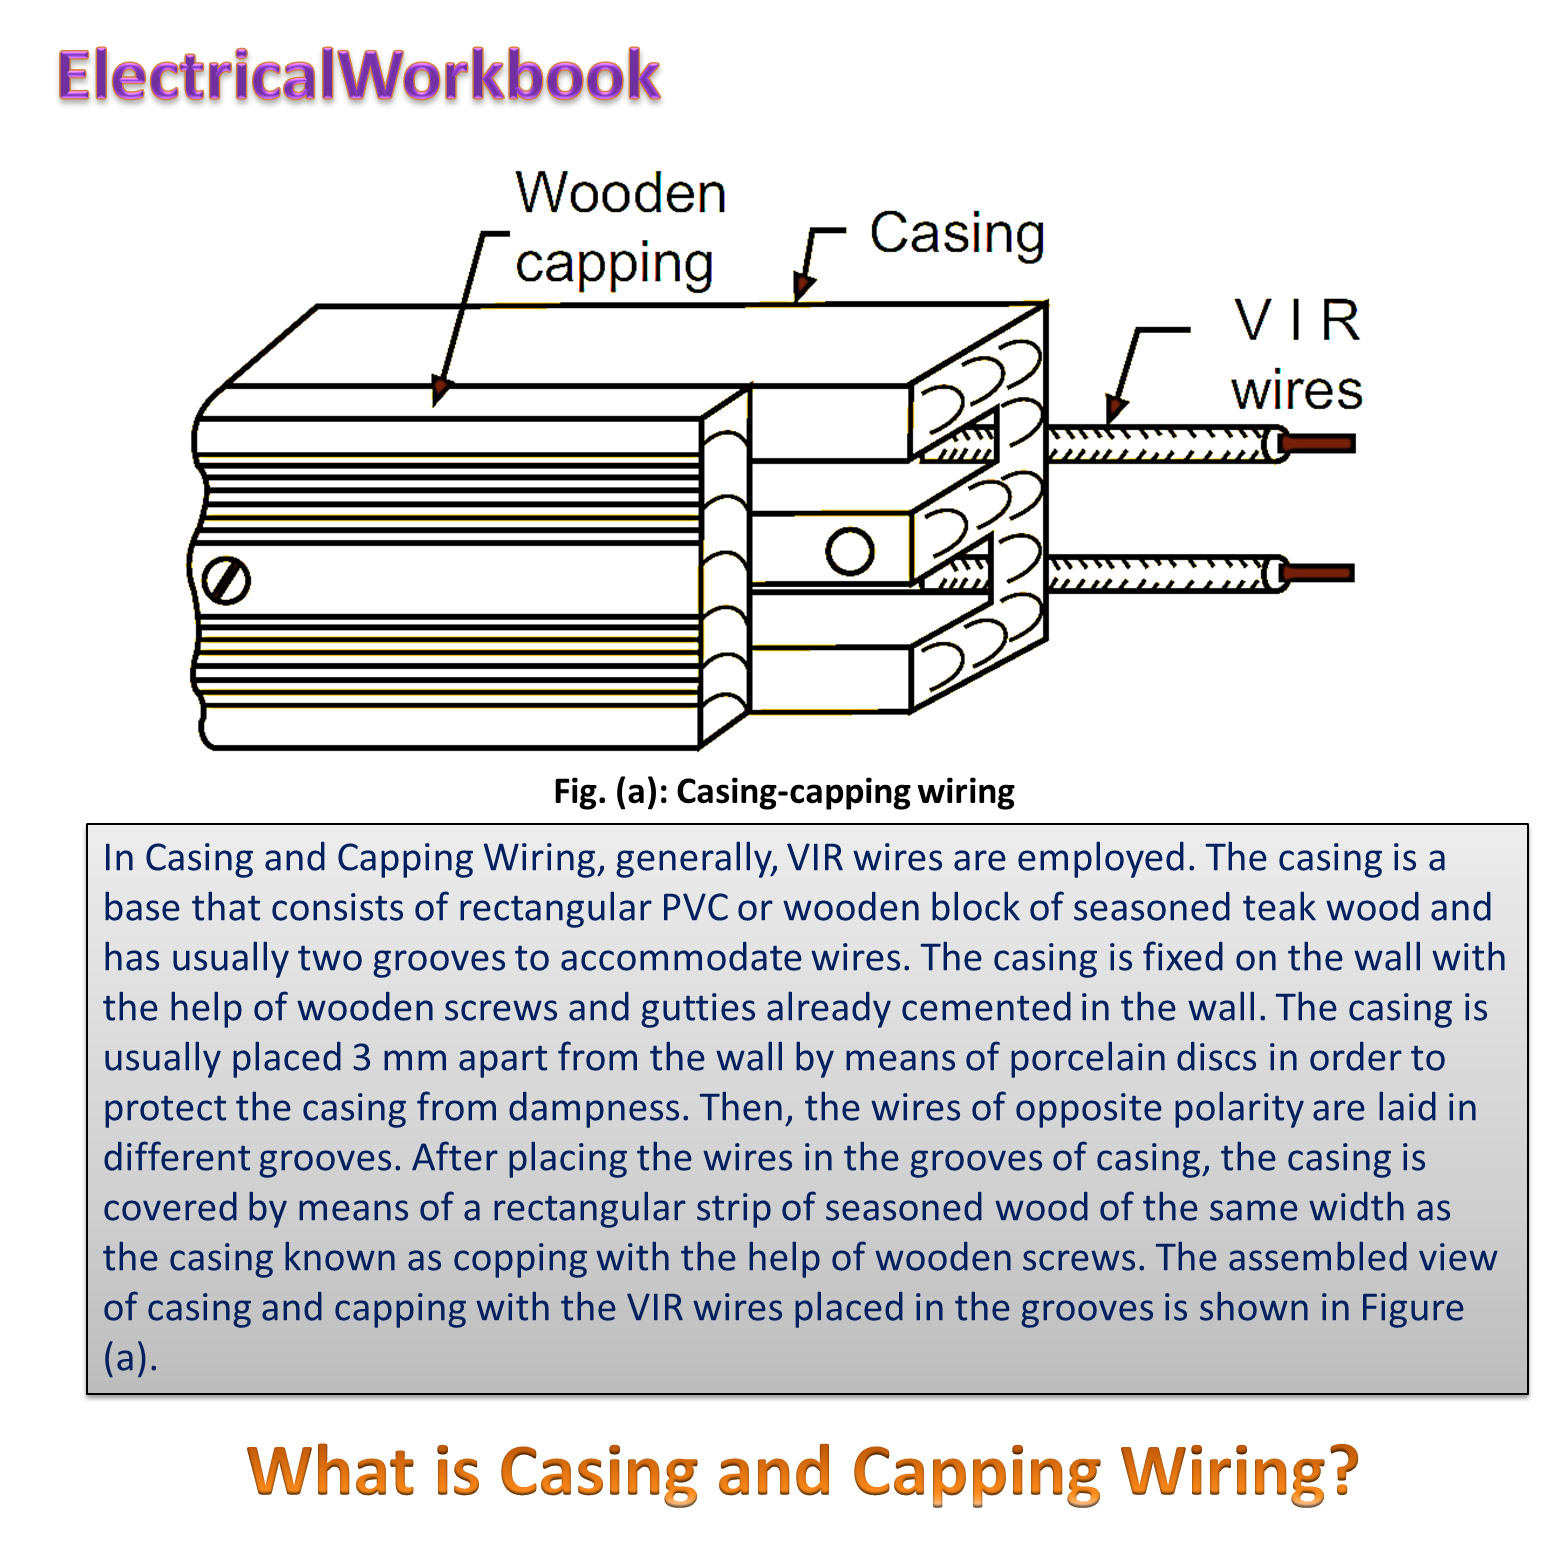 What is Casing and Capping Wiring? ElectricalWorkbook